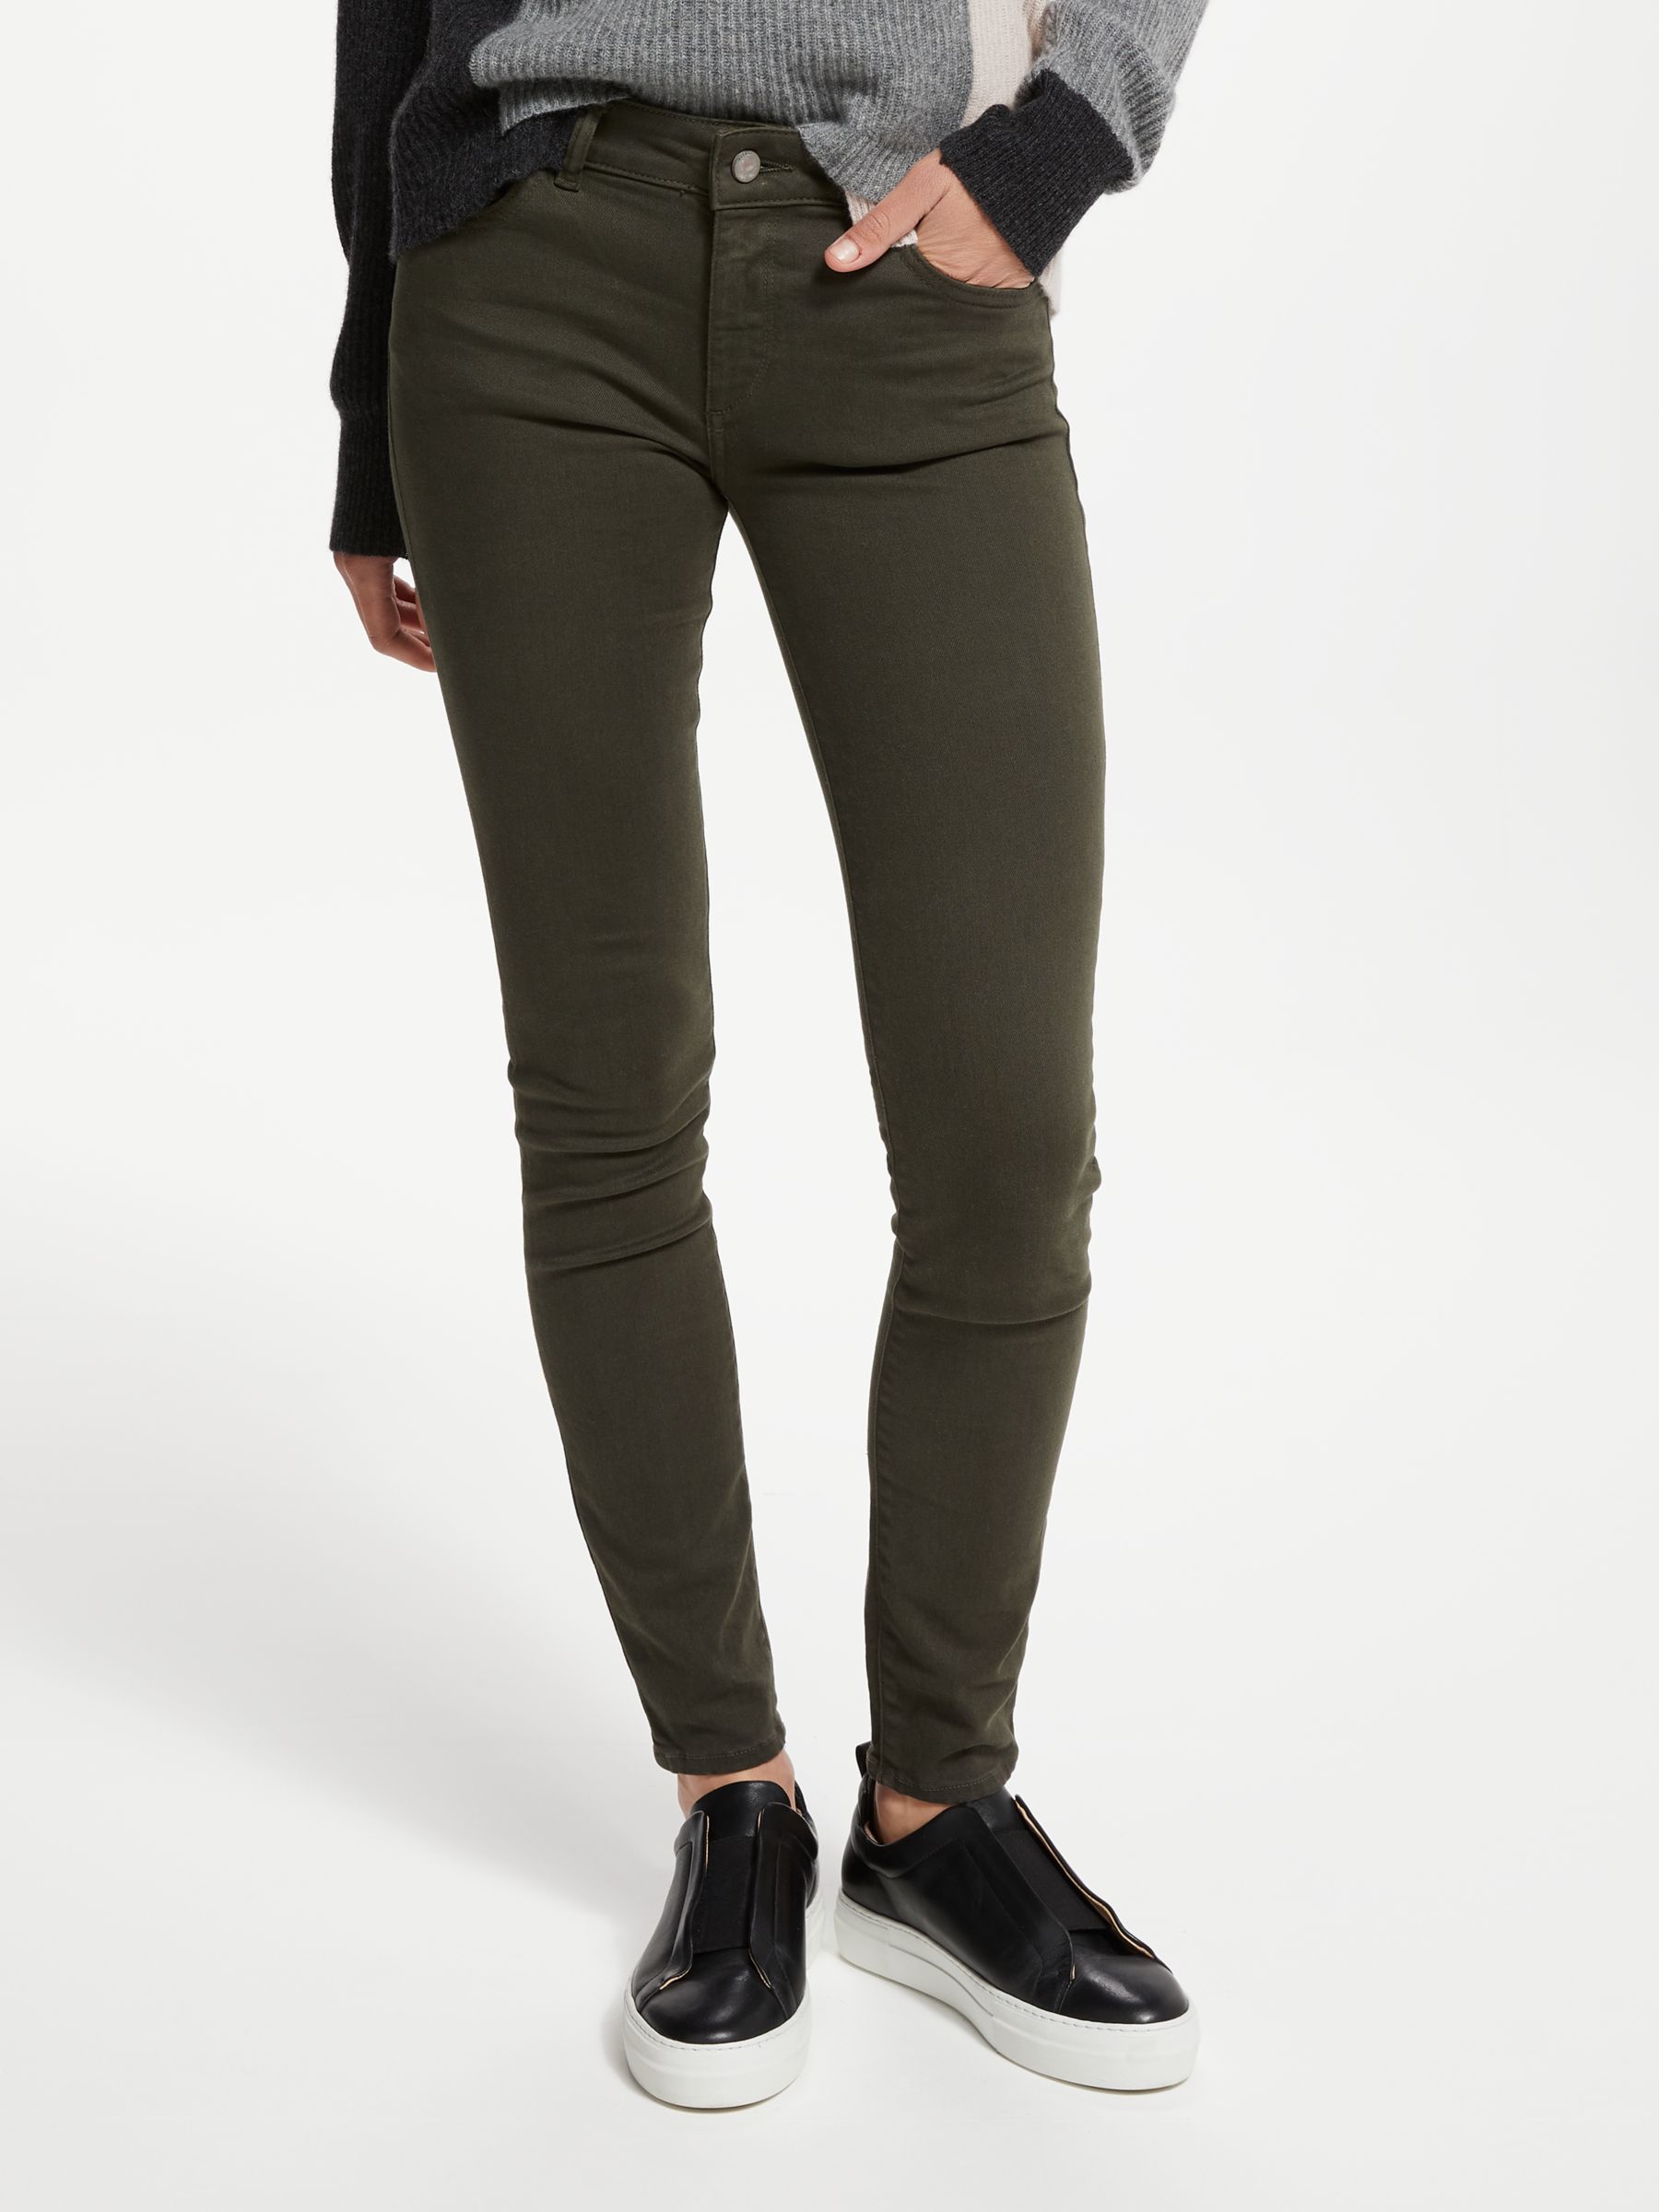 DL1961 Florence Mid Rise Skinny Jeans, Dale